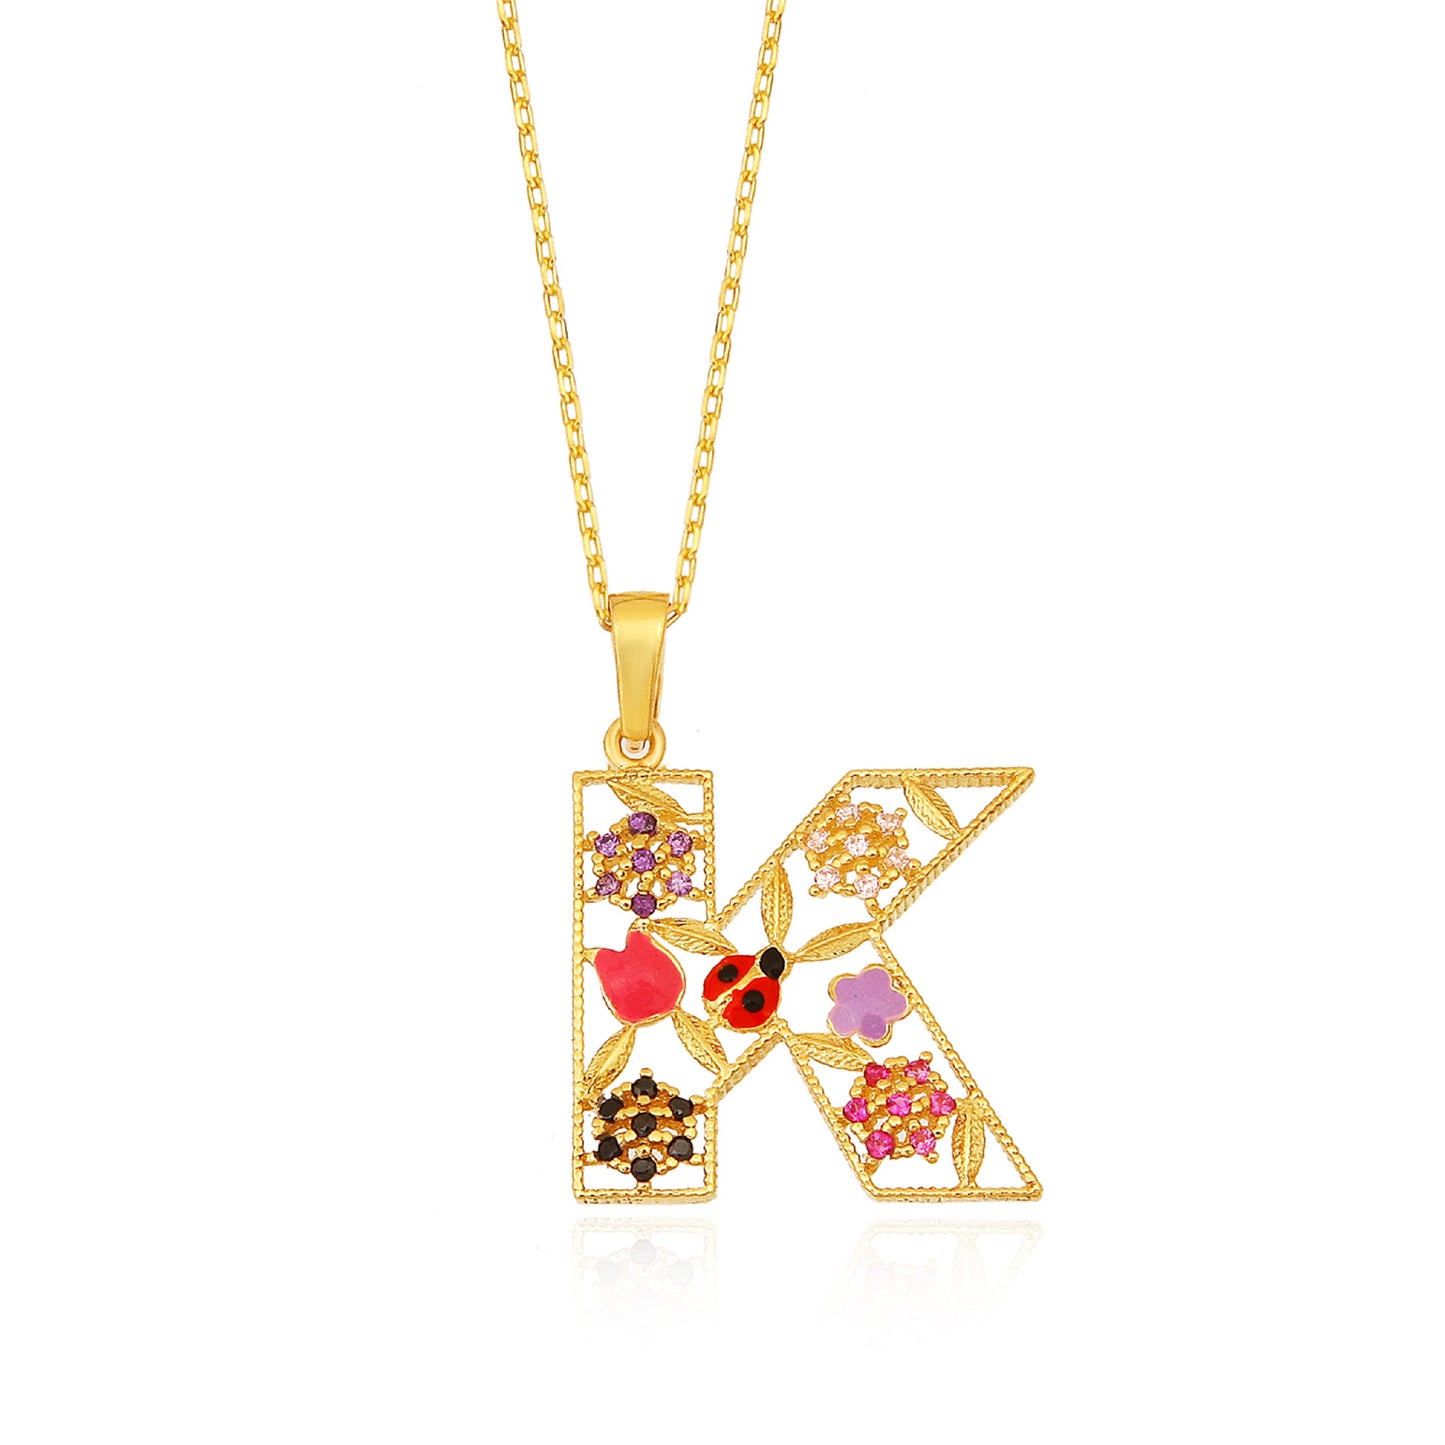 K  letter necklace with flowers